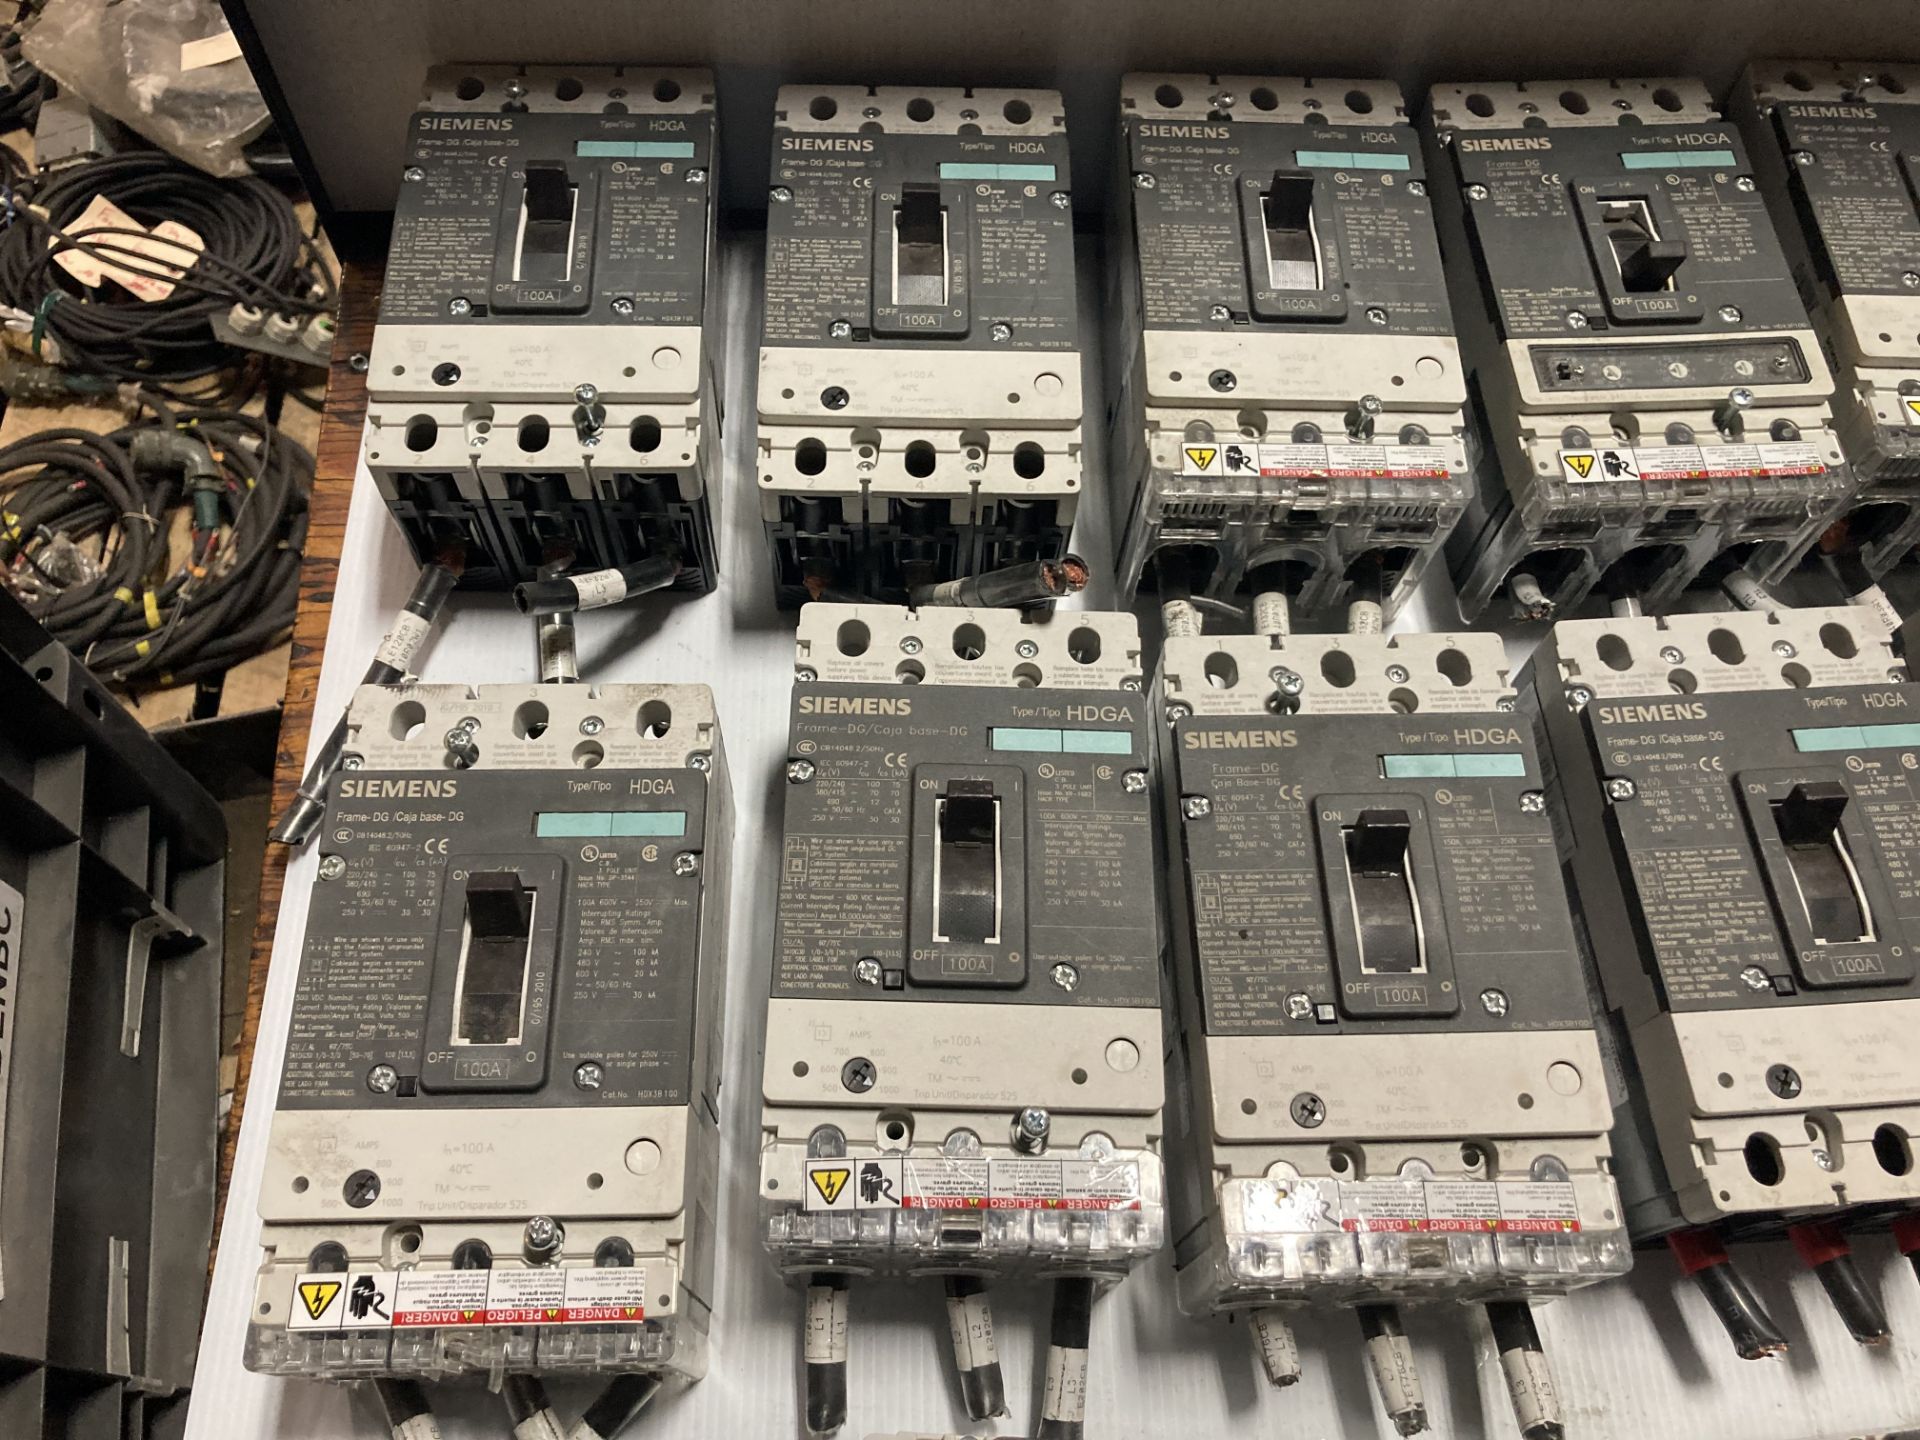 Lot of (14) Siemens 100A Circuit Breakers, Type: HDGA - Image 2 of 5